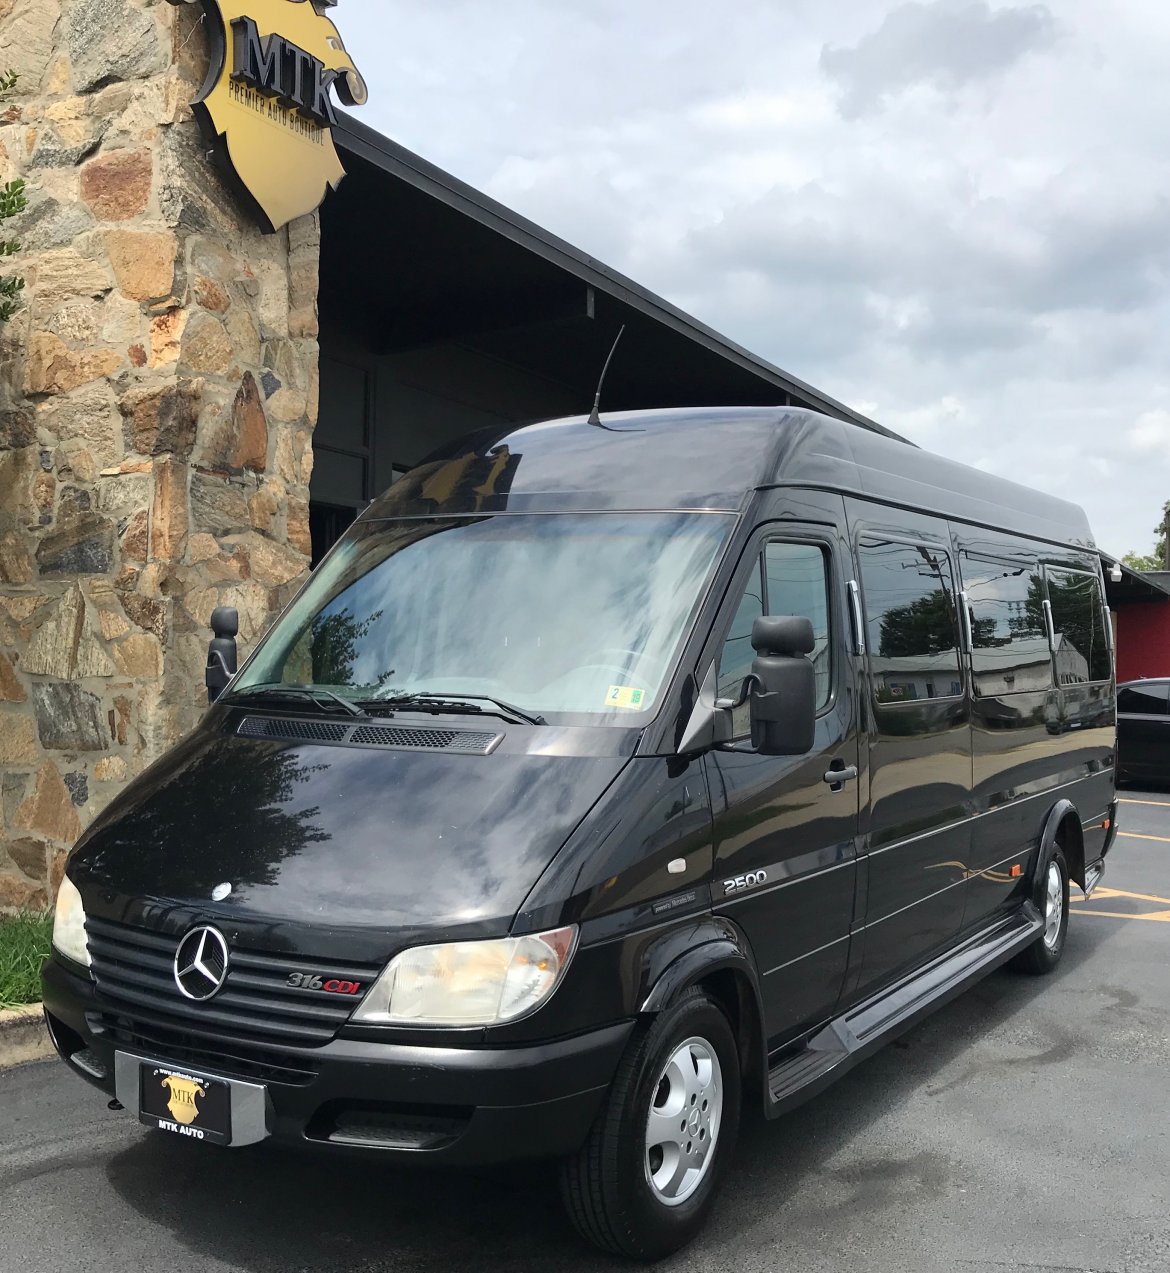 Used 2006 Mercedes-Benz Sprinter Limo for sale #WS-11629 ...